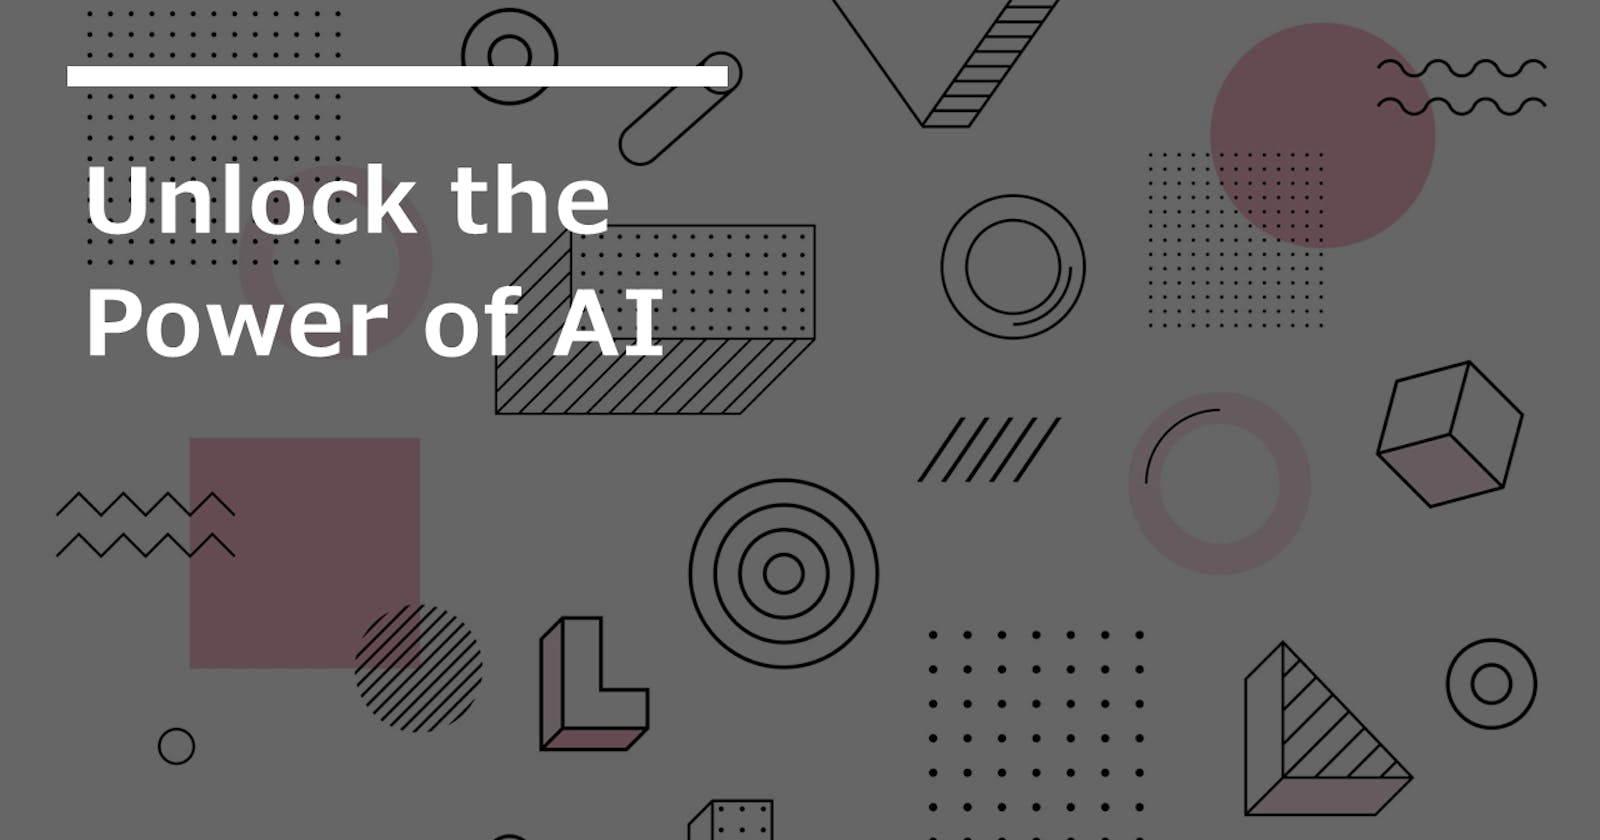 Unlock the Power of AI: Exploring the Amazing Chatbot Revolution with Open AI GPT!